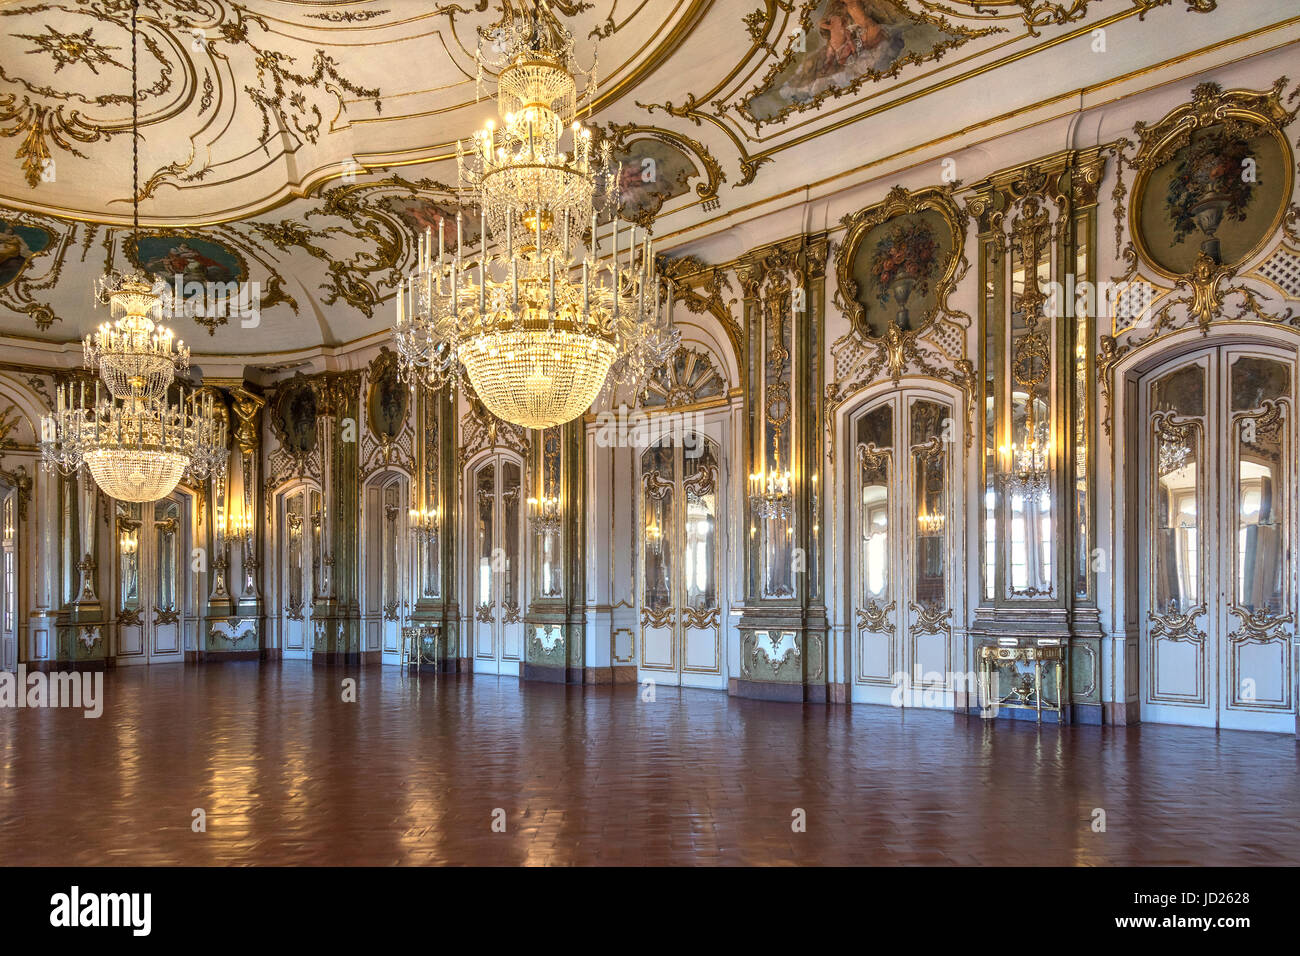 The Ballroom in the National Palace of Queluz - Lisbon - Portugal. It was designed by Robillon in 1760. Stock Photo